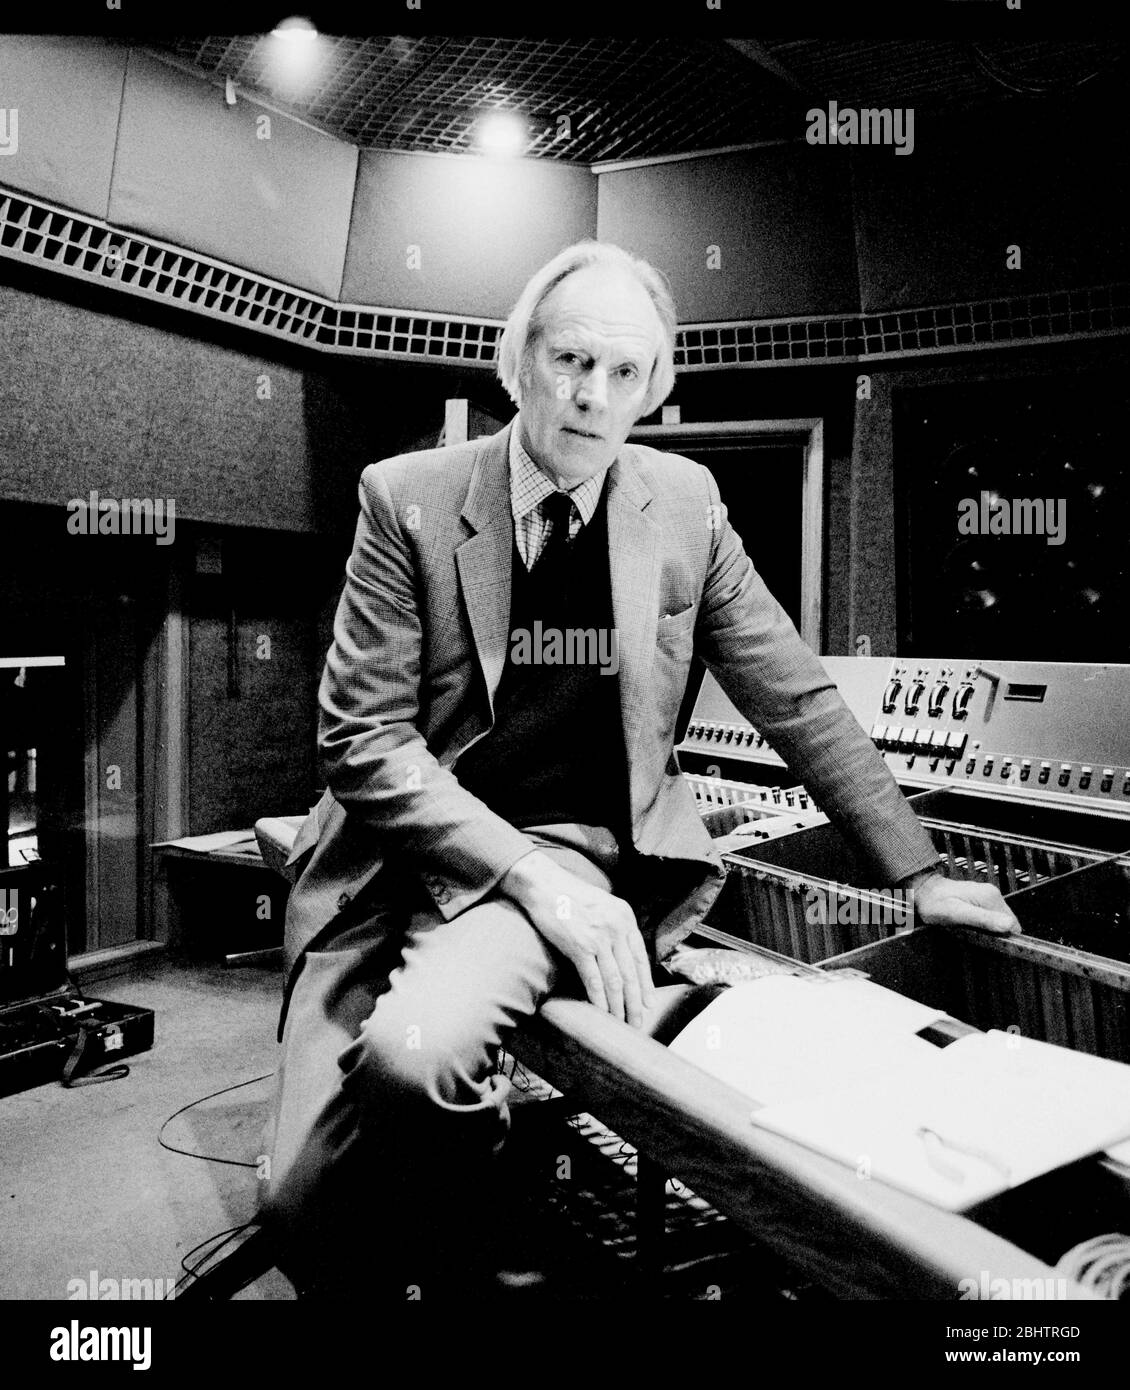 George Martin, producer for The Beatles, at a recording studio in